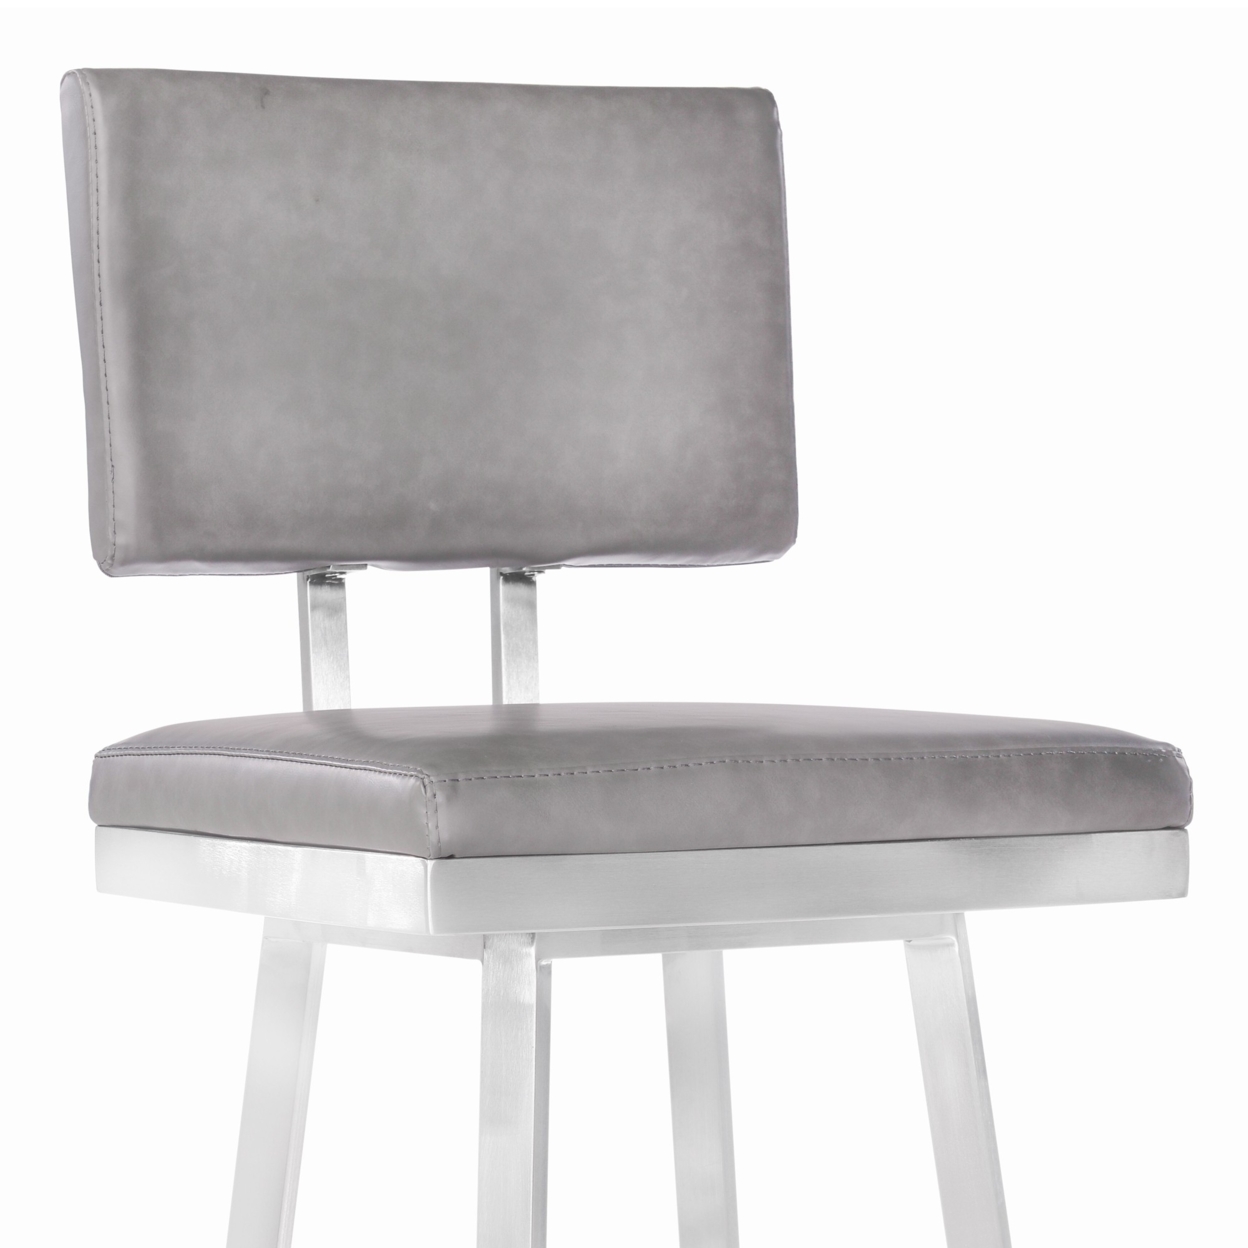 Lumbar Back Faux Leather Barstool With Stainless Steel Legs, Gray And Silver- Saltoro Sherpi